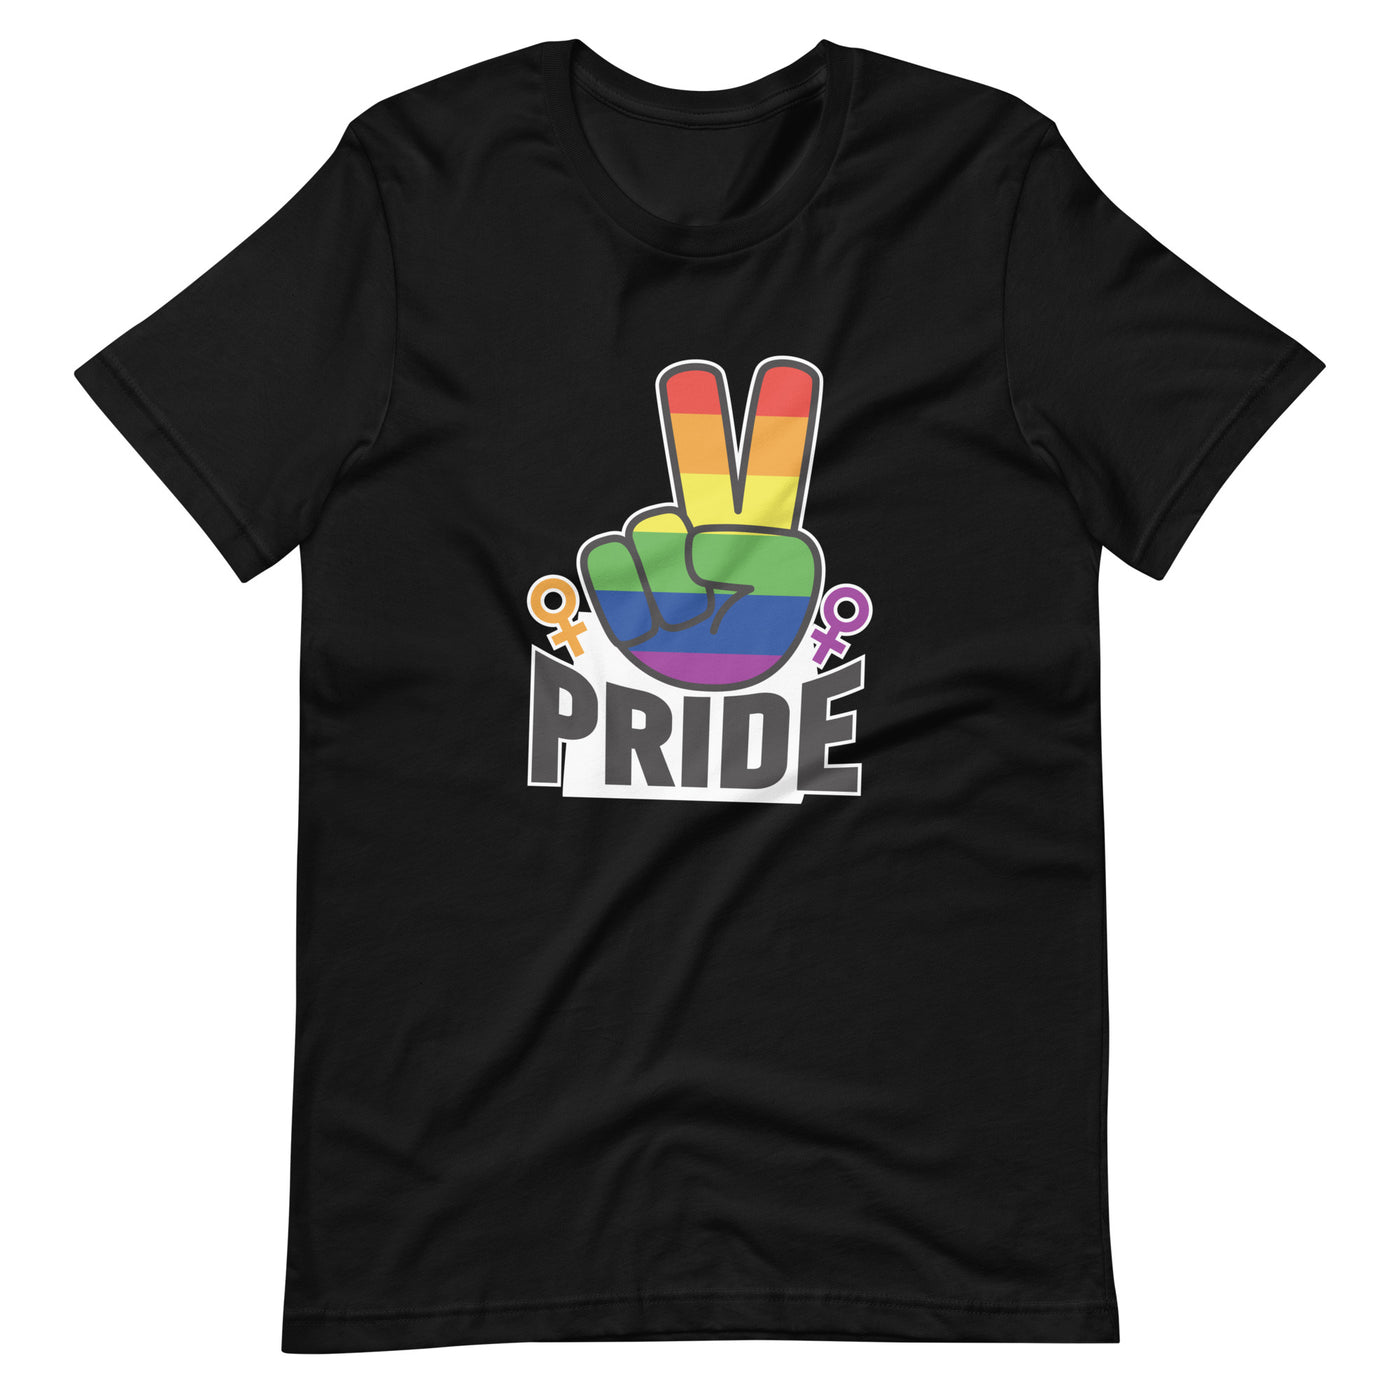 Pride Clothes - Where There Is Love There Is Peace Pride T-Shirt - Black